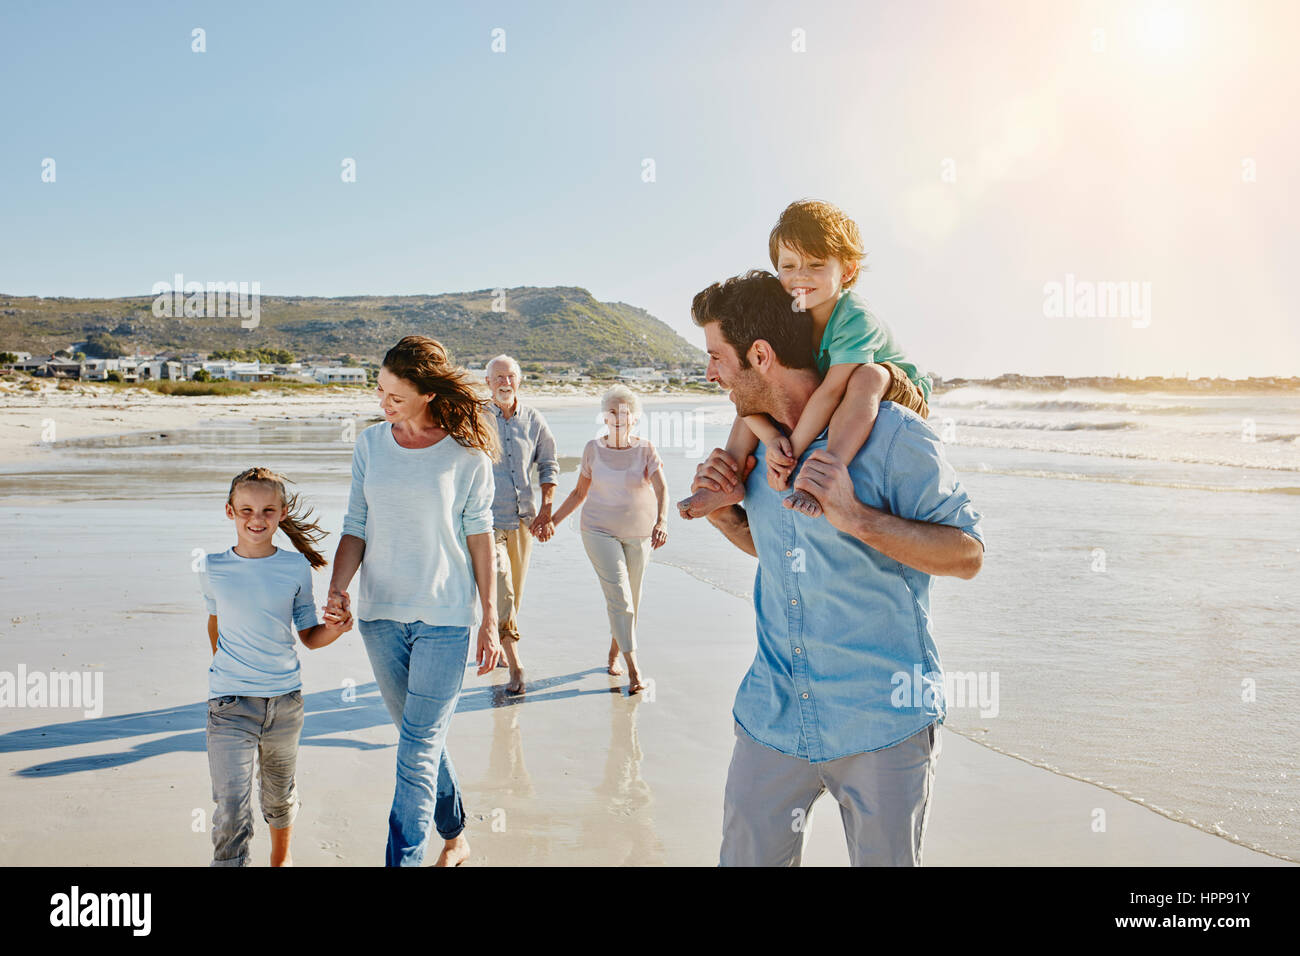 Three generations family strolling on the beach Stock Photo